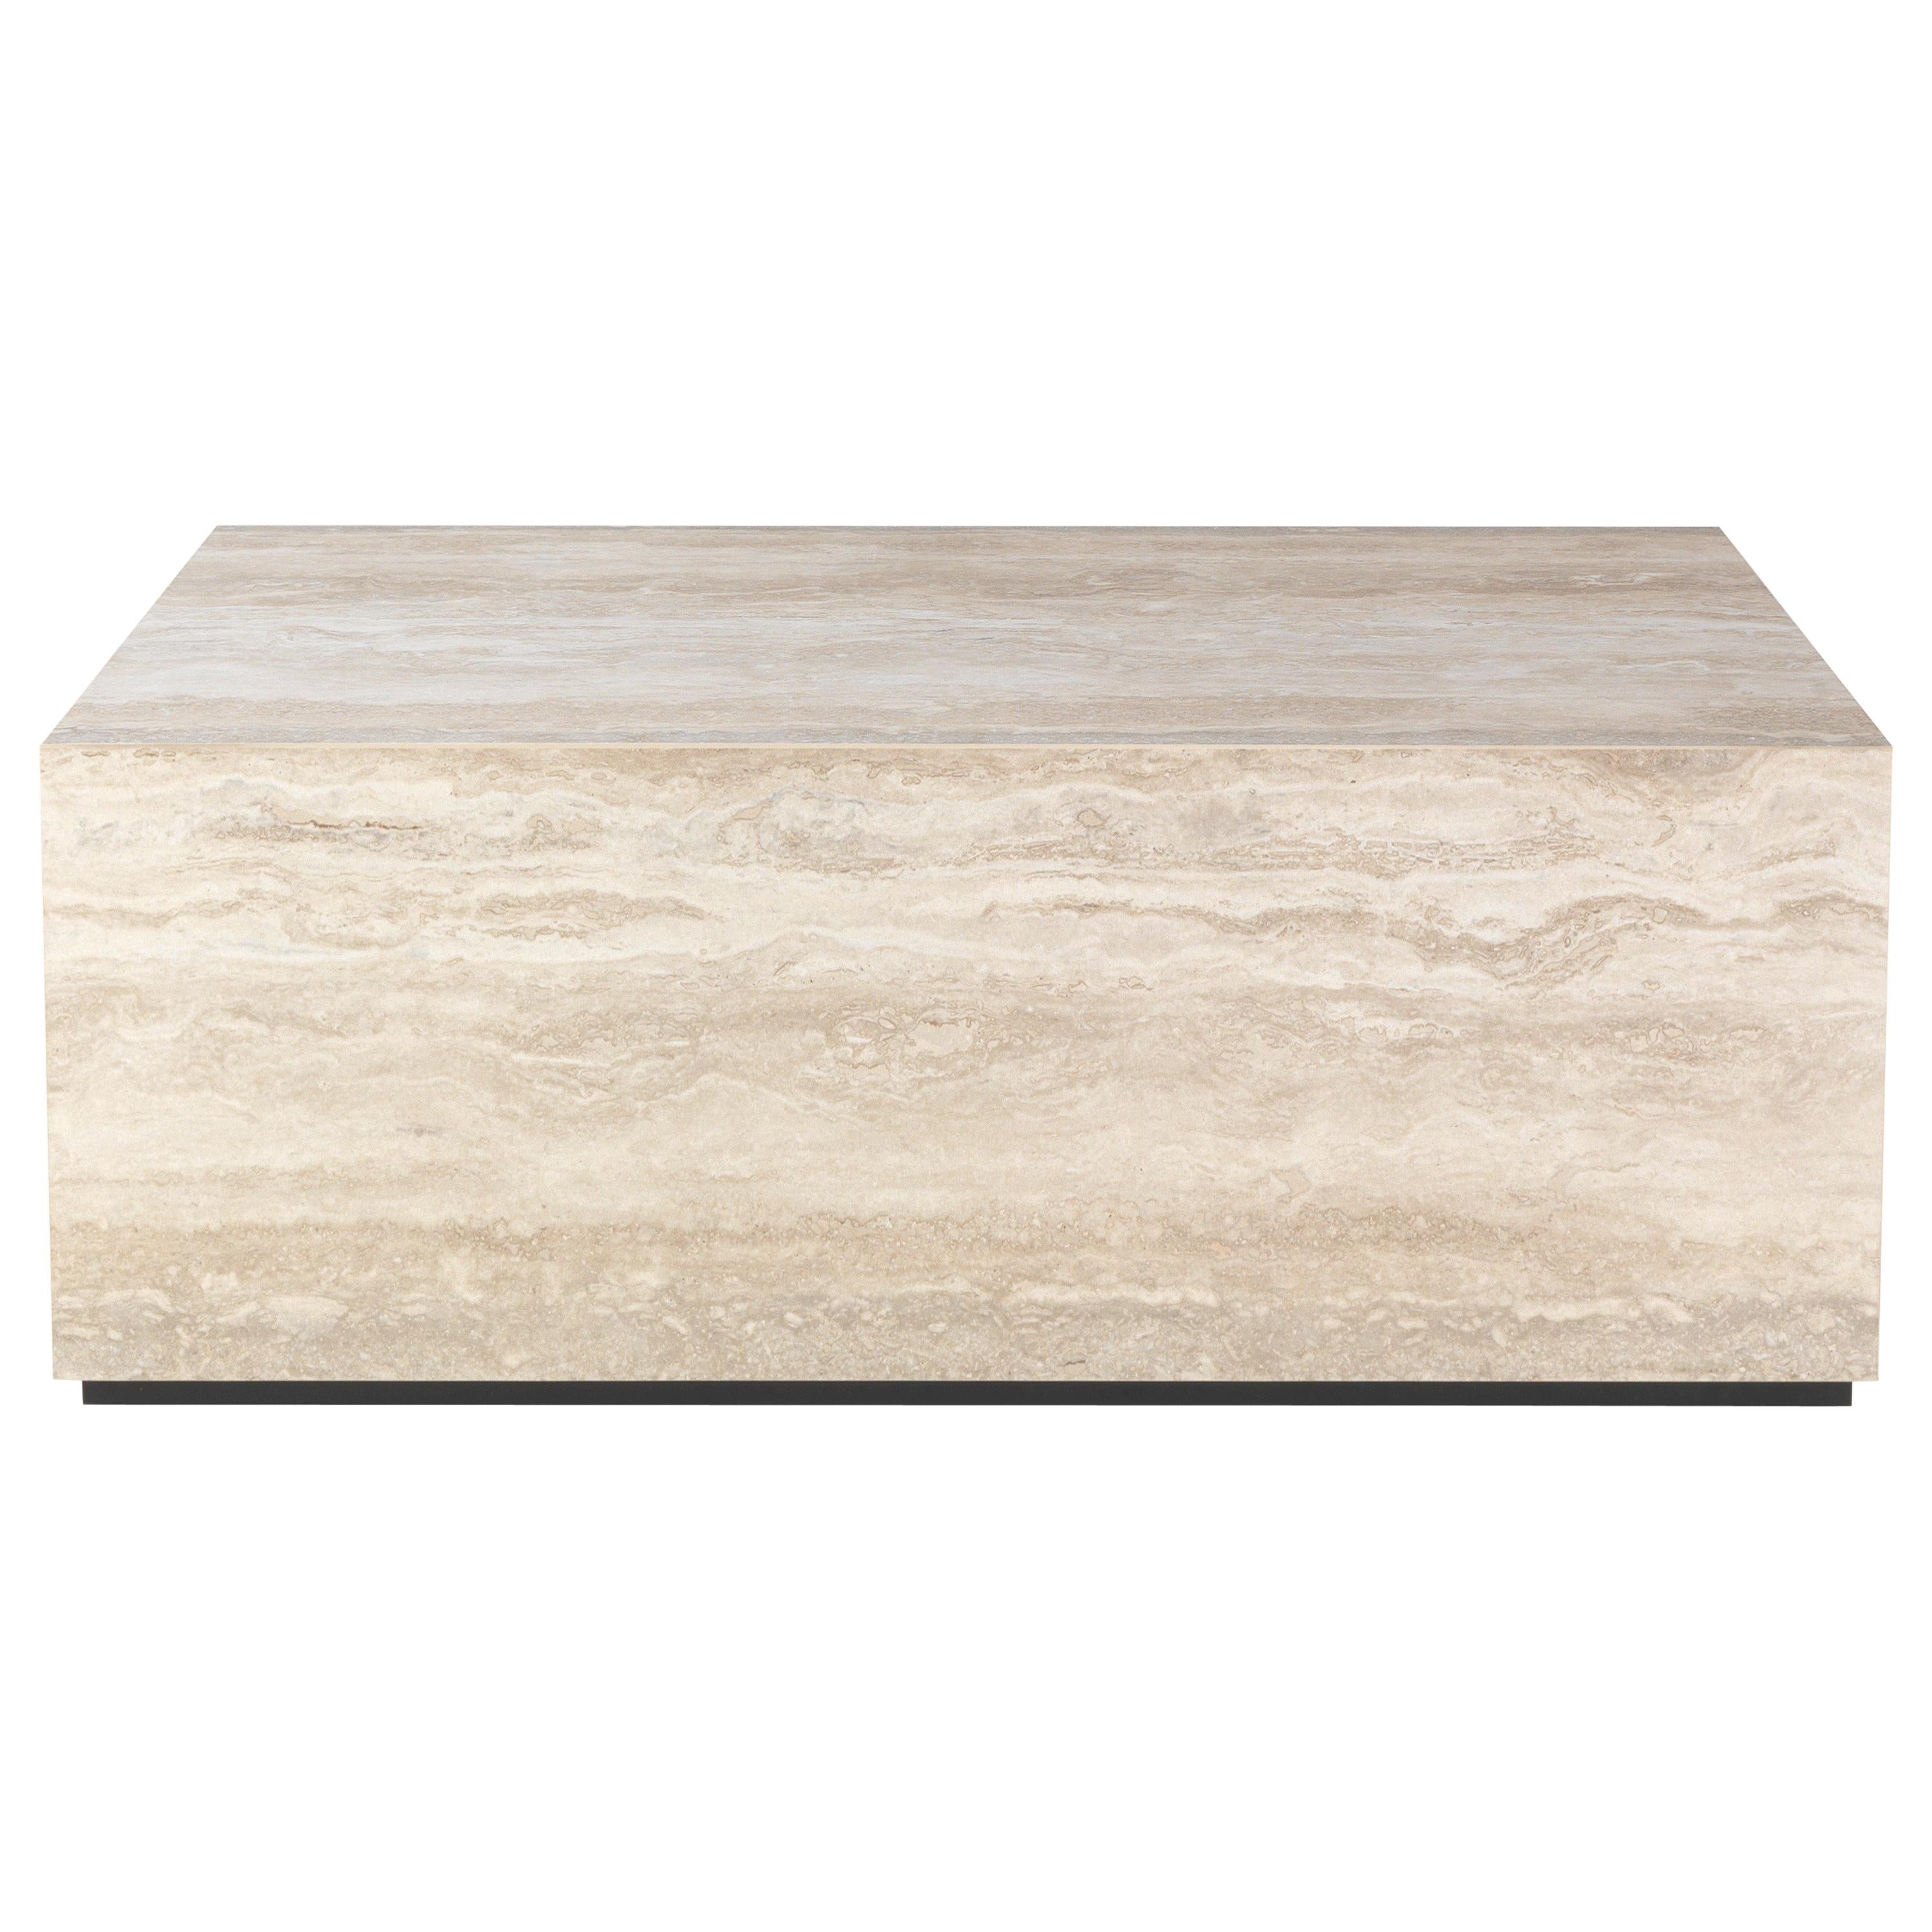 21st Century Flair Side Table in Porcelain Stoneware by Gianfranco Ferré Home